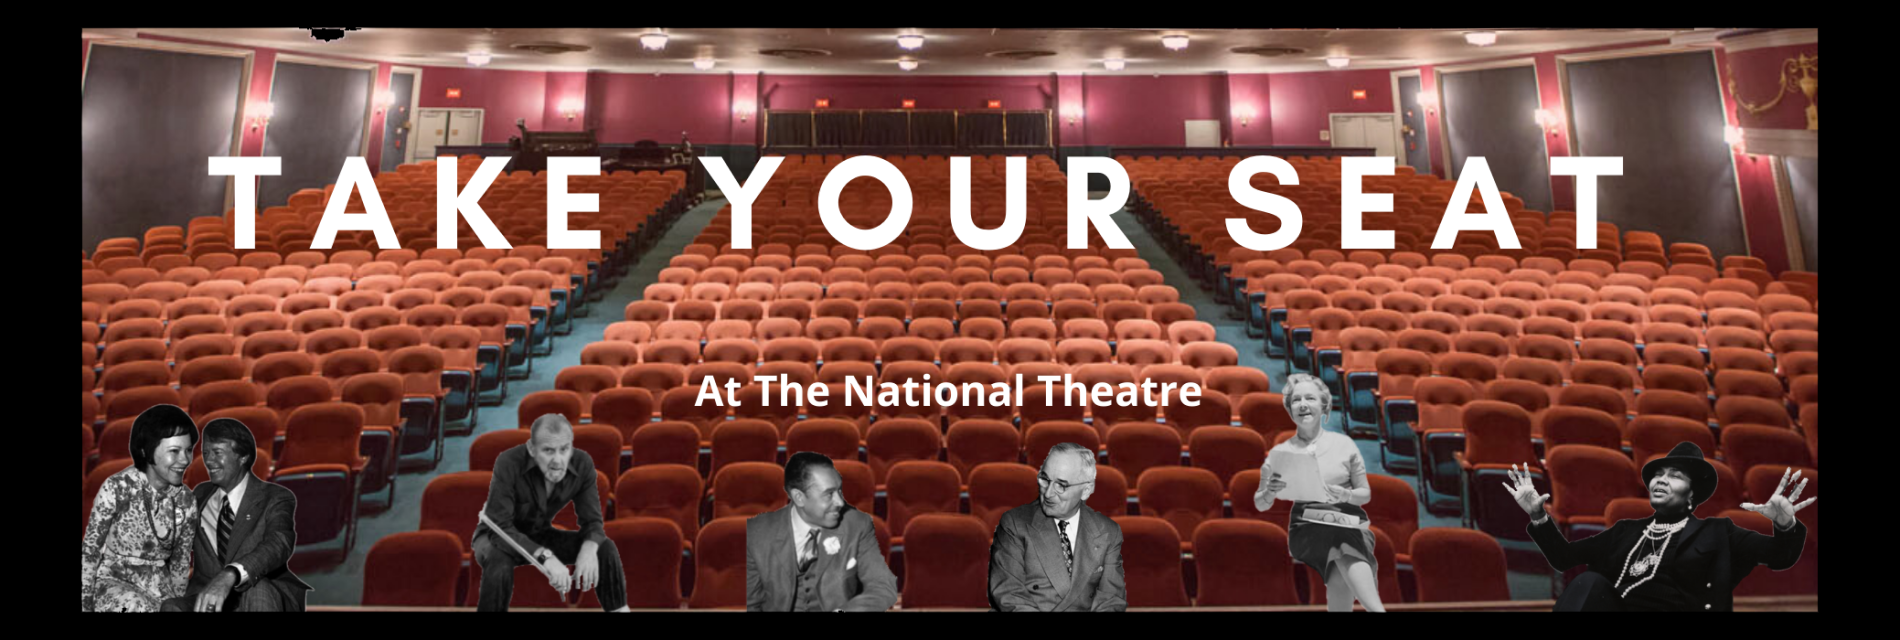 Slide 6: Dedicate a Seat at The National Theatre